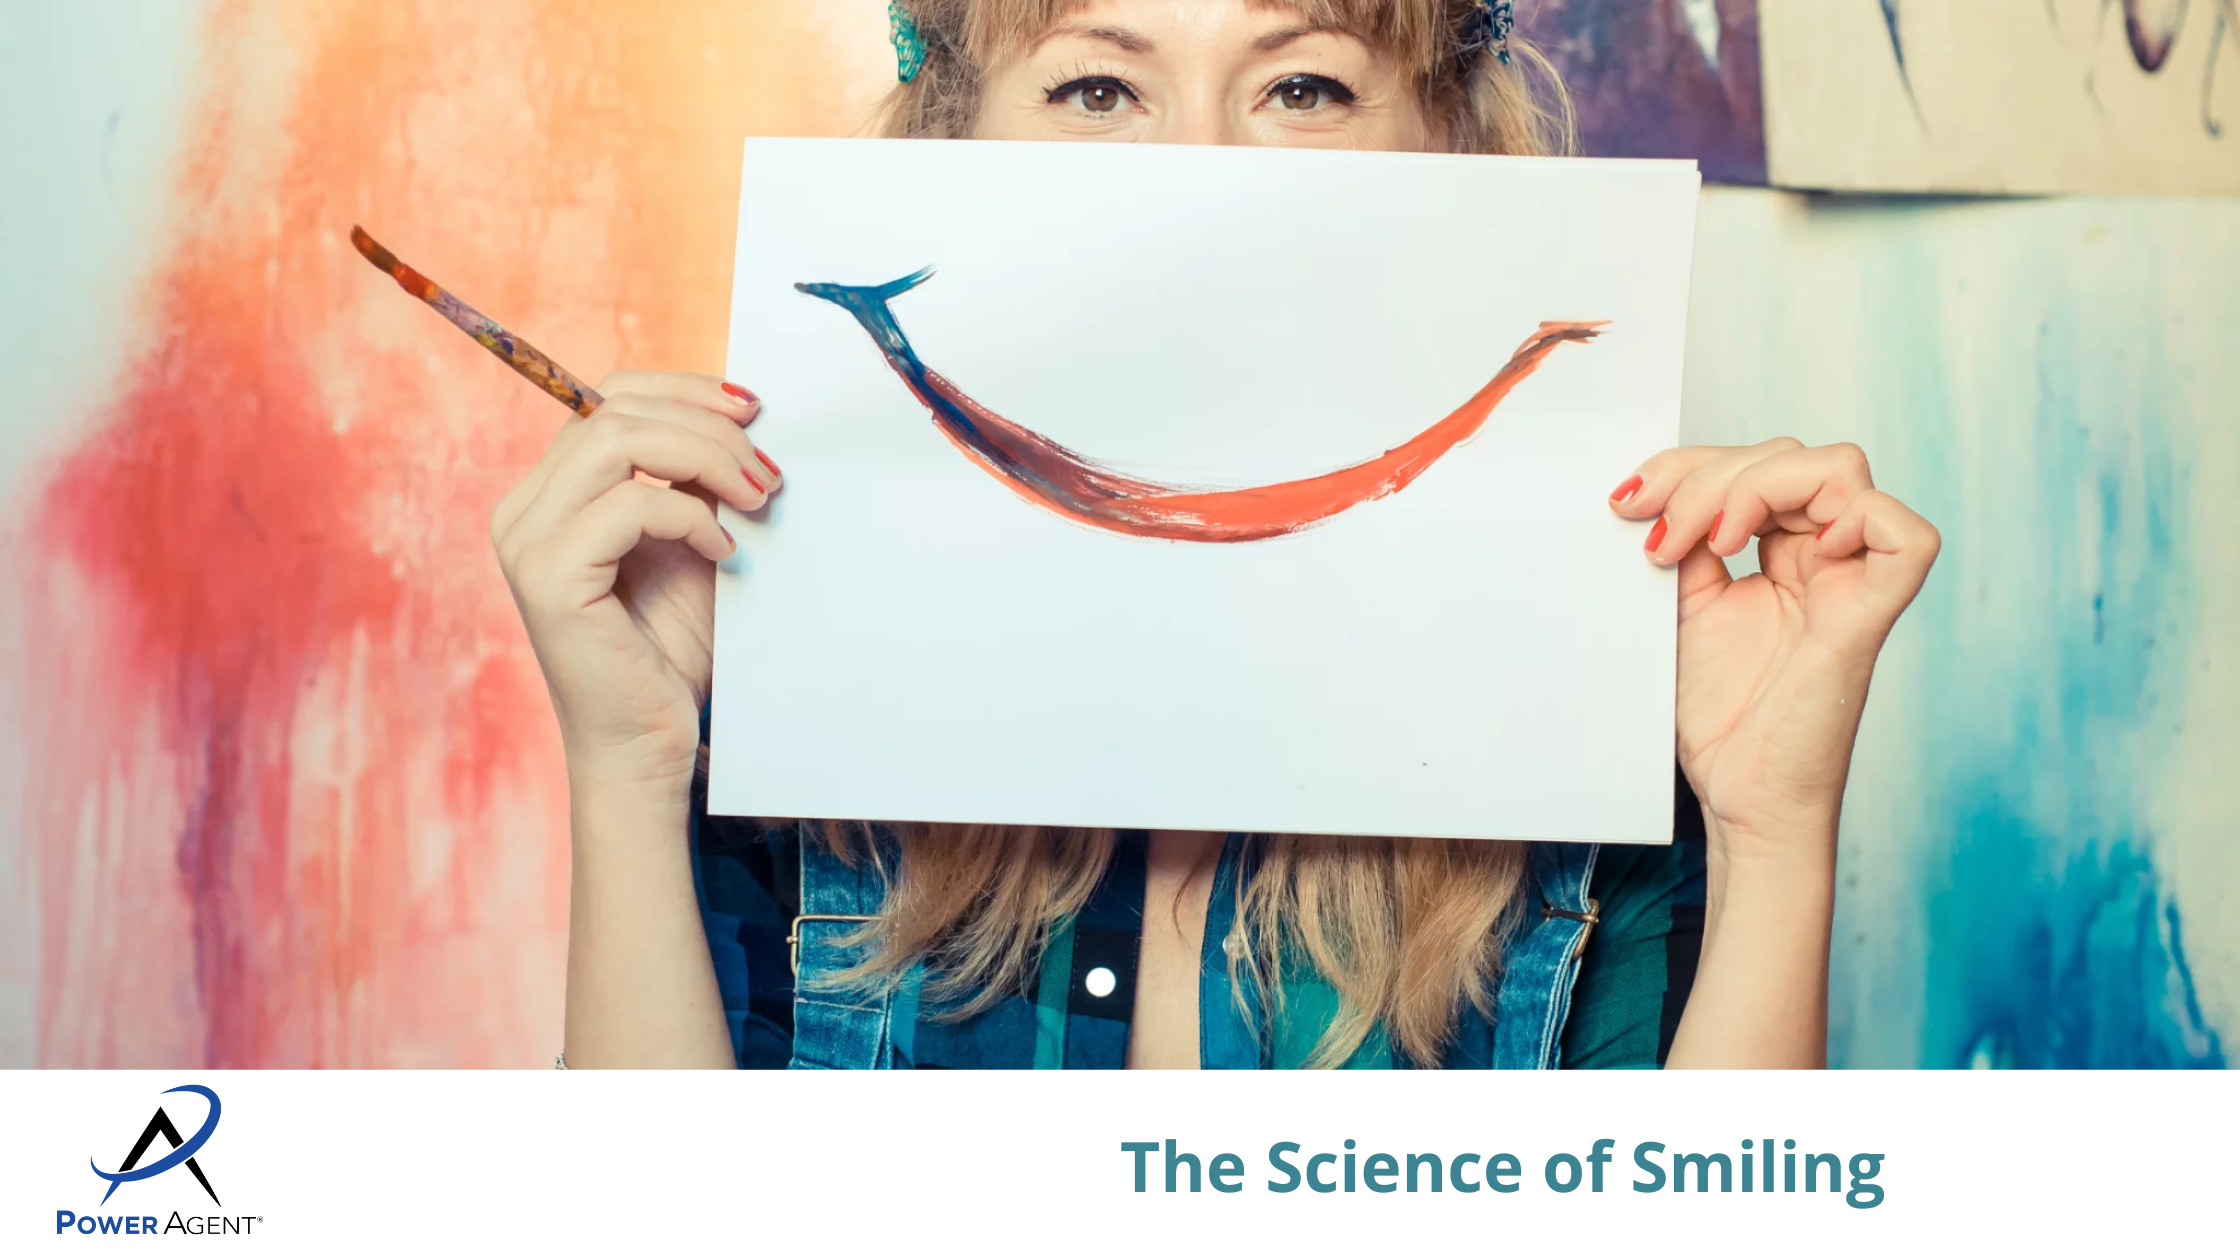 The Science of Smiling